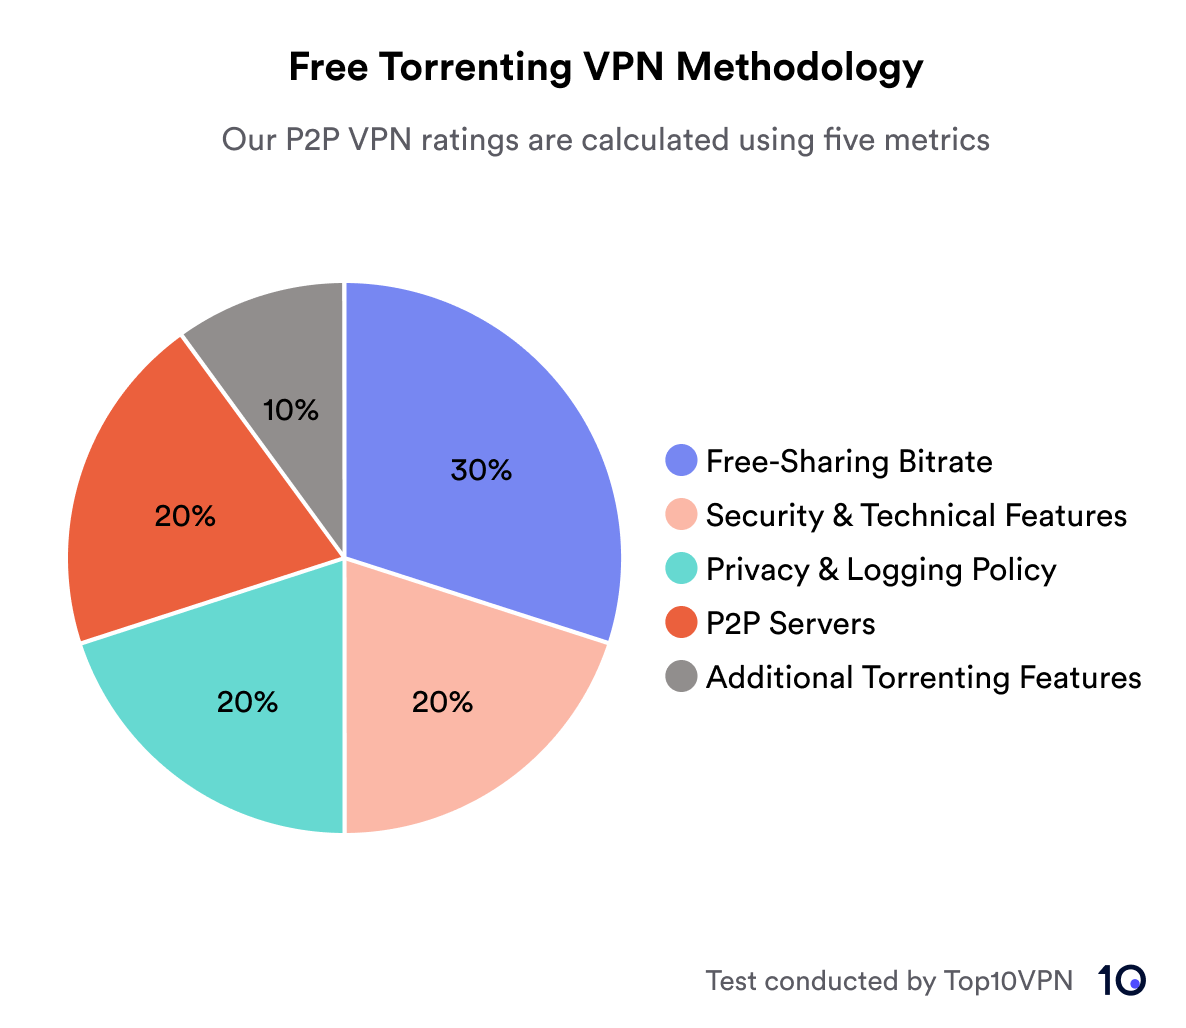 Pie chart showing the breakdown of our free torrenting methodology, which calculated using 5 metrics. Free-sharing bitrate is allocated 30%, security and technical features 20%, privacy and logging policy 20%, p2p servers 20% and additional torrenting features 10%